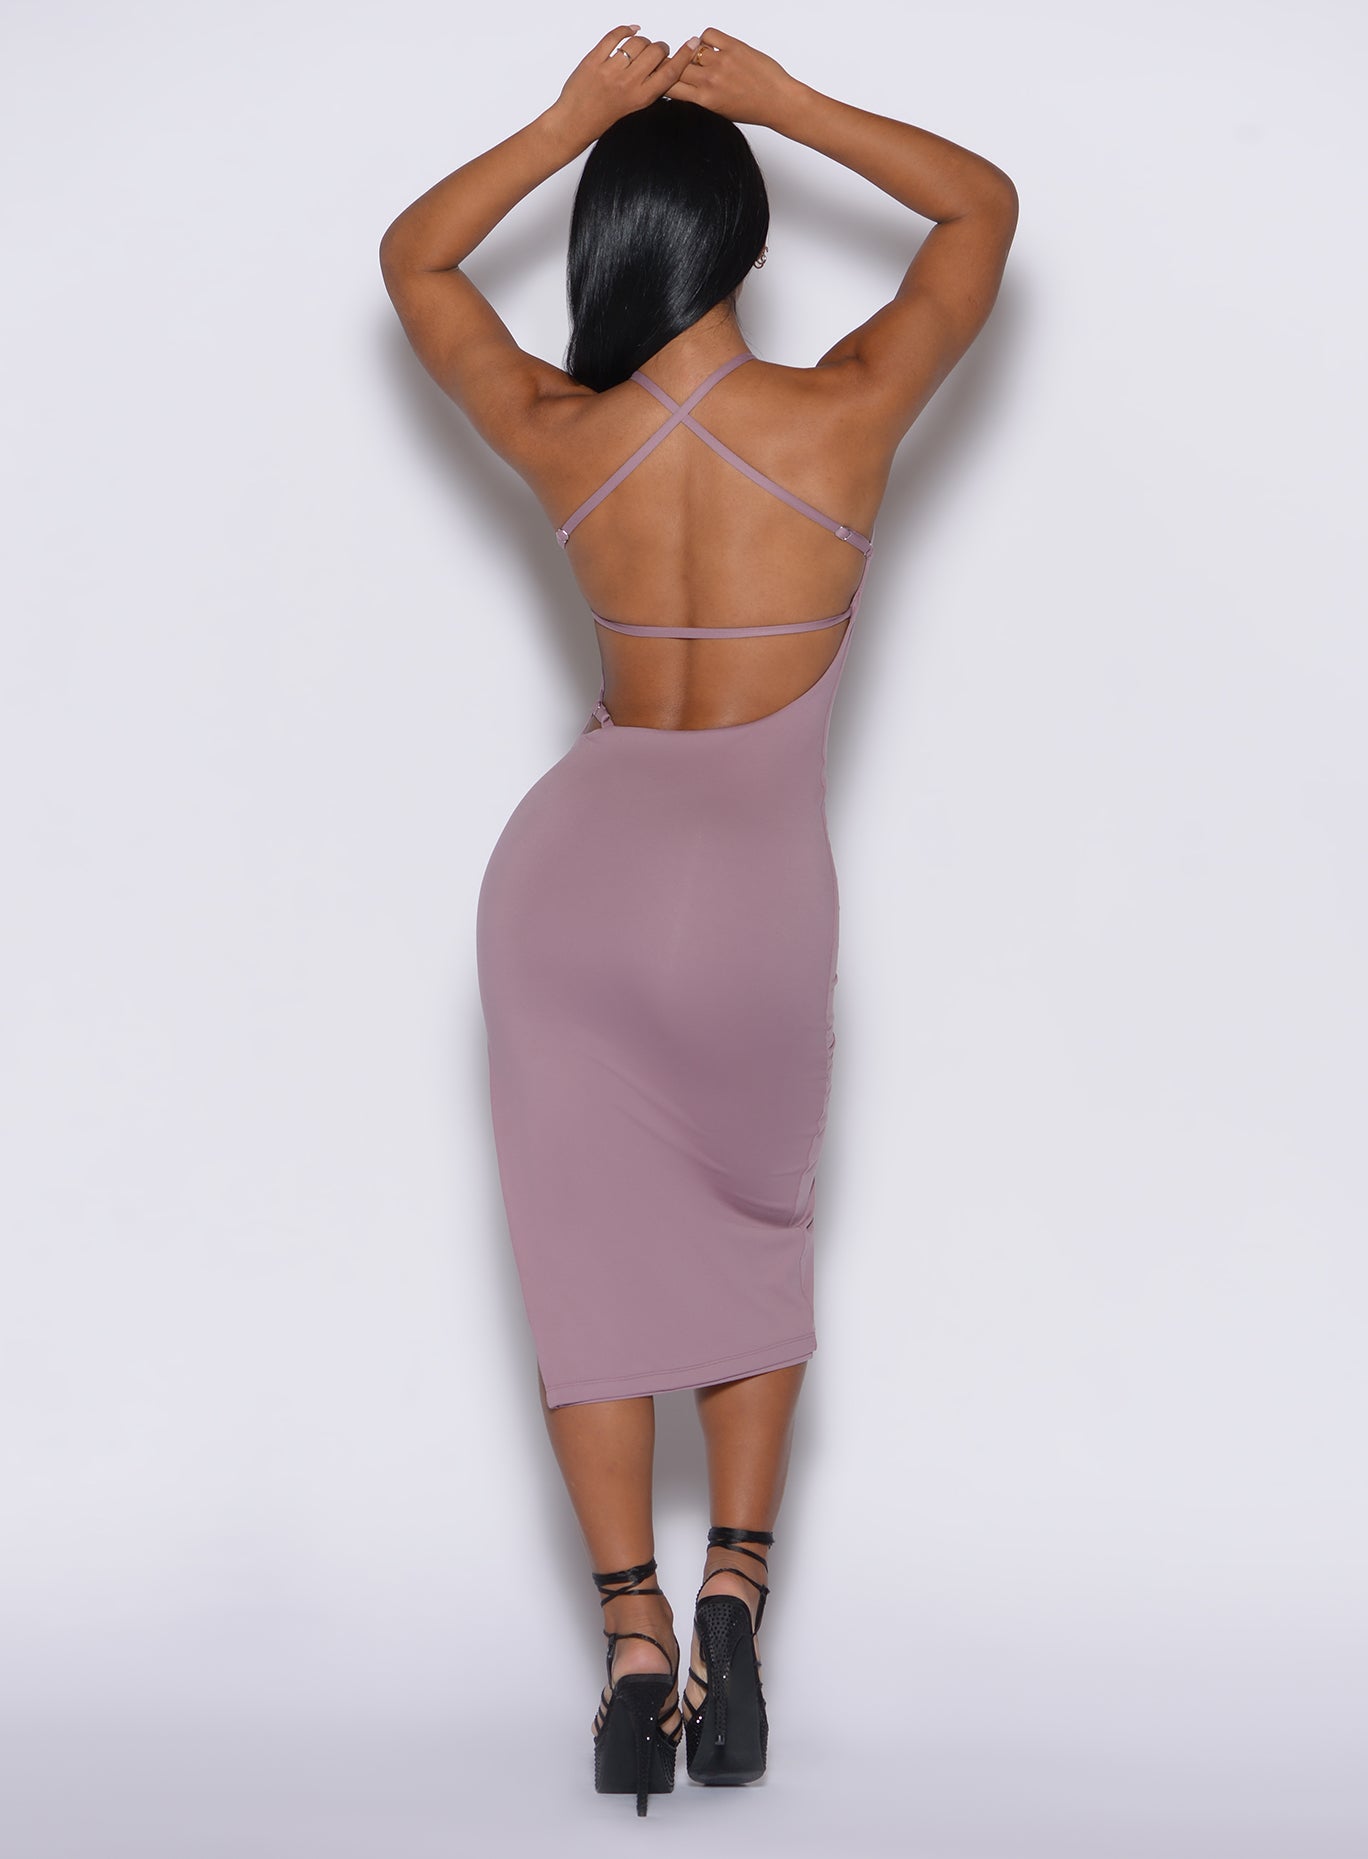 back profile view of a model with her hands over her head  wearing our bombshell bunny dress in light mauve color